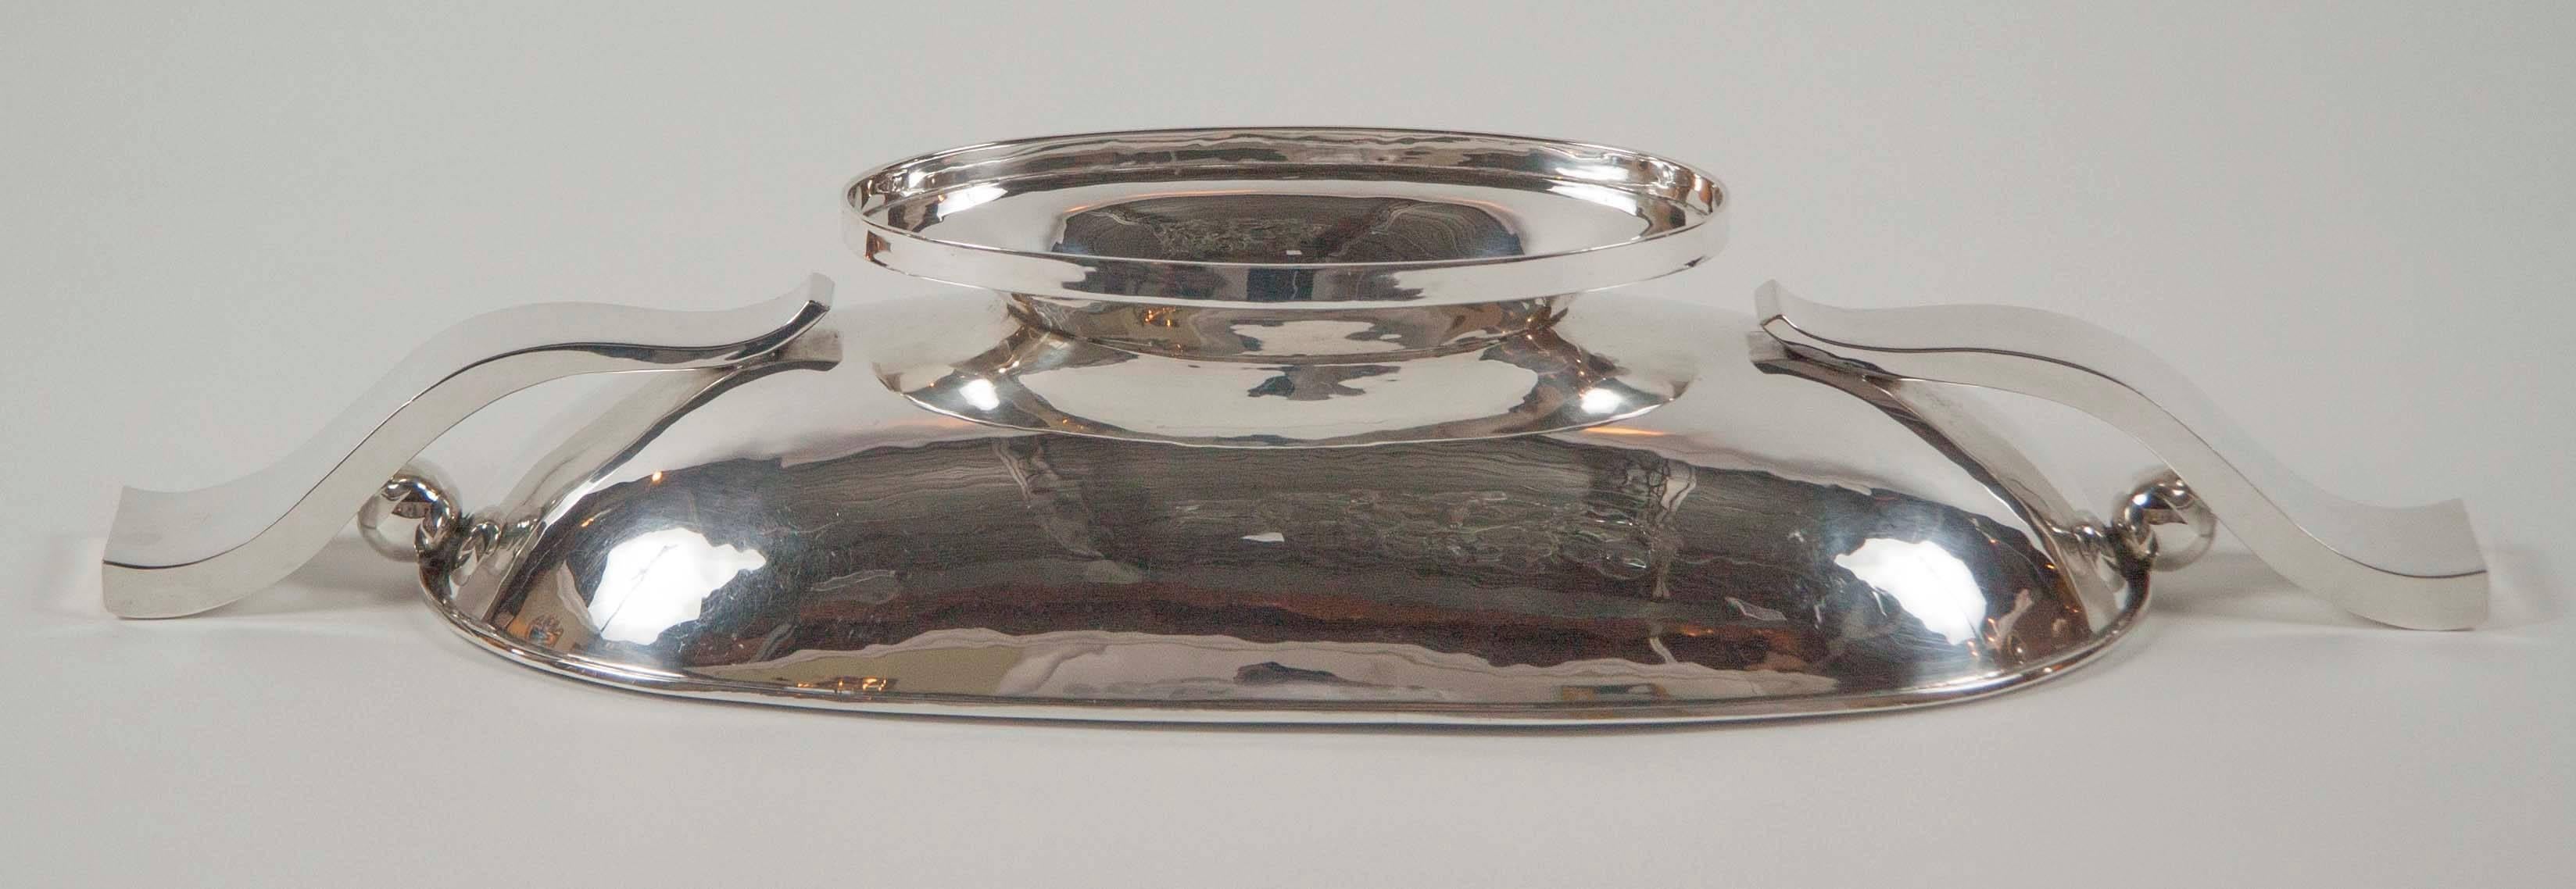 Art Deco Style Sterling Silver Centre Bowl by Tango Aceves 3